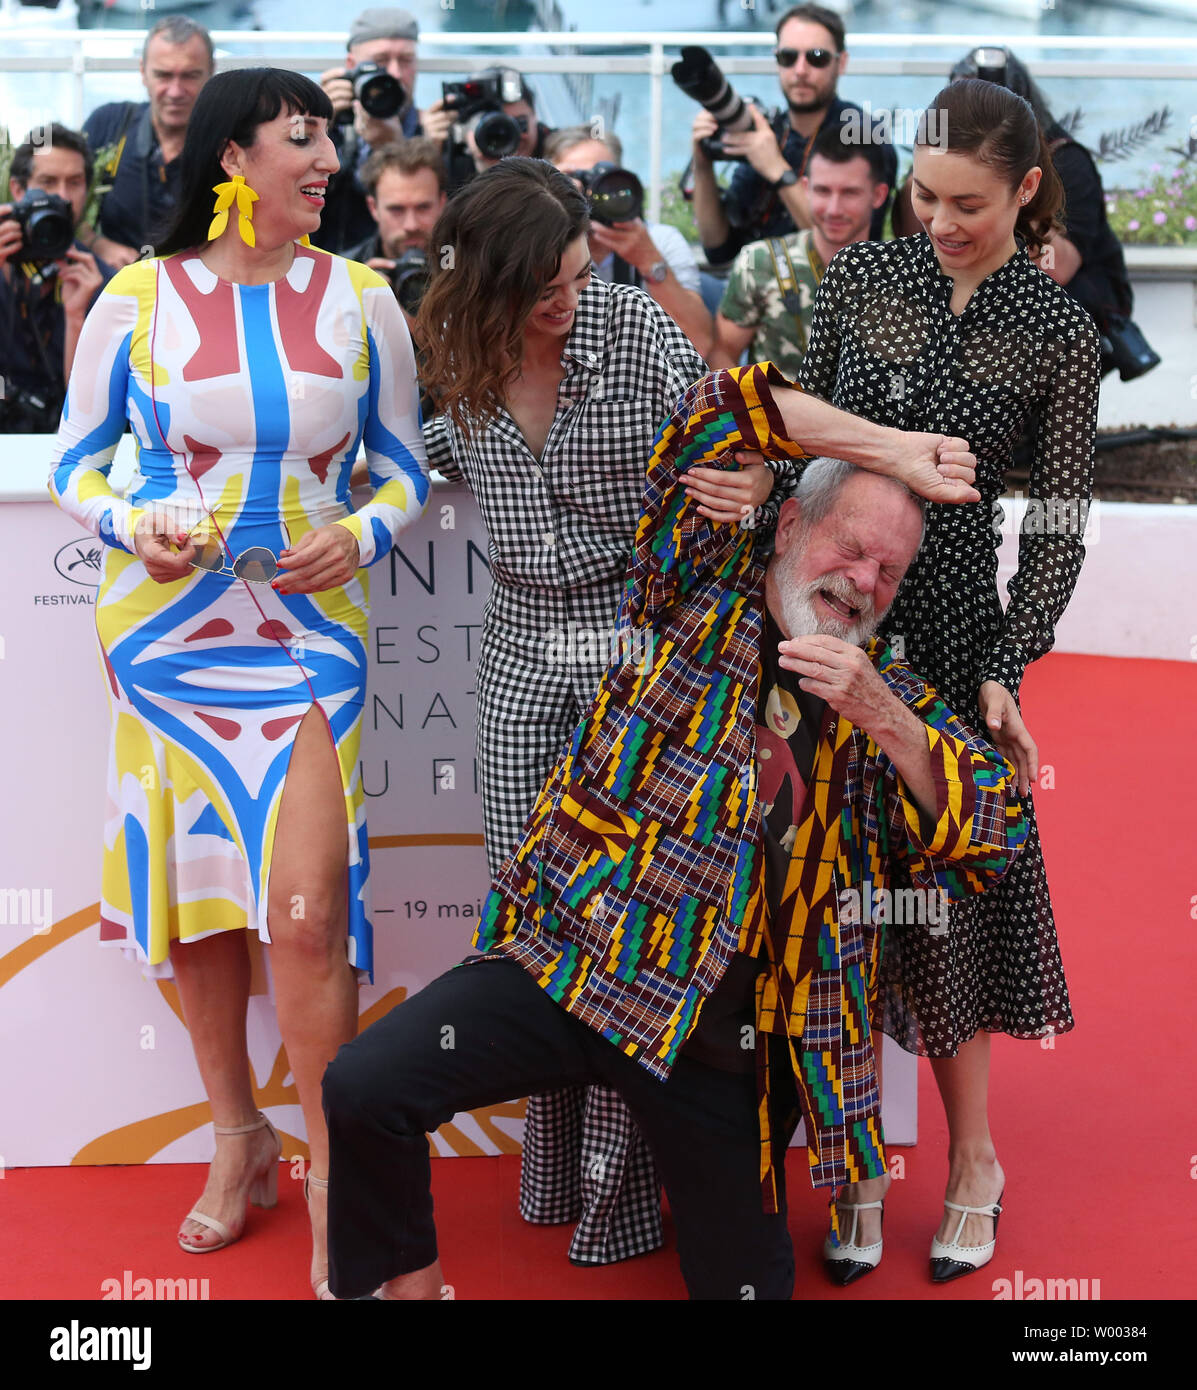 (From L to R) Rossy de Palma, Joana Ribeiro Terry Gilliam and Olga Kurylenko arrive at a photocall for the film 'The Man Who Killed Don Quixote' during the 71st annual Cannes International Film Festival in Cannes, France on May 19, 2018.  Photo by David Silpa/UPI Stock Photo